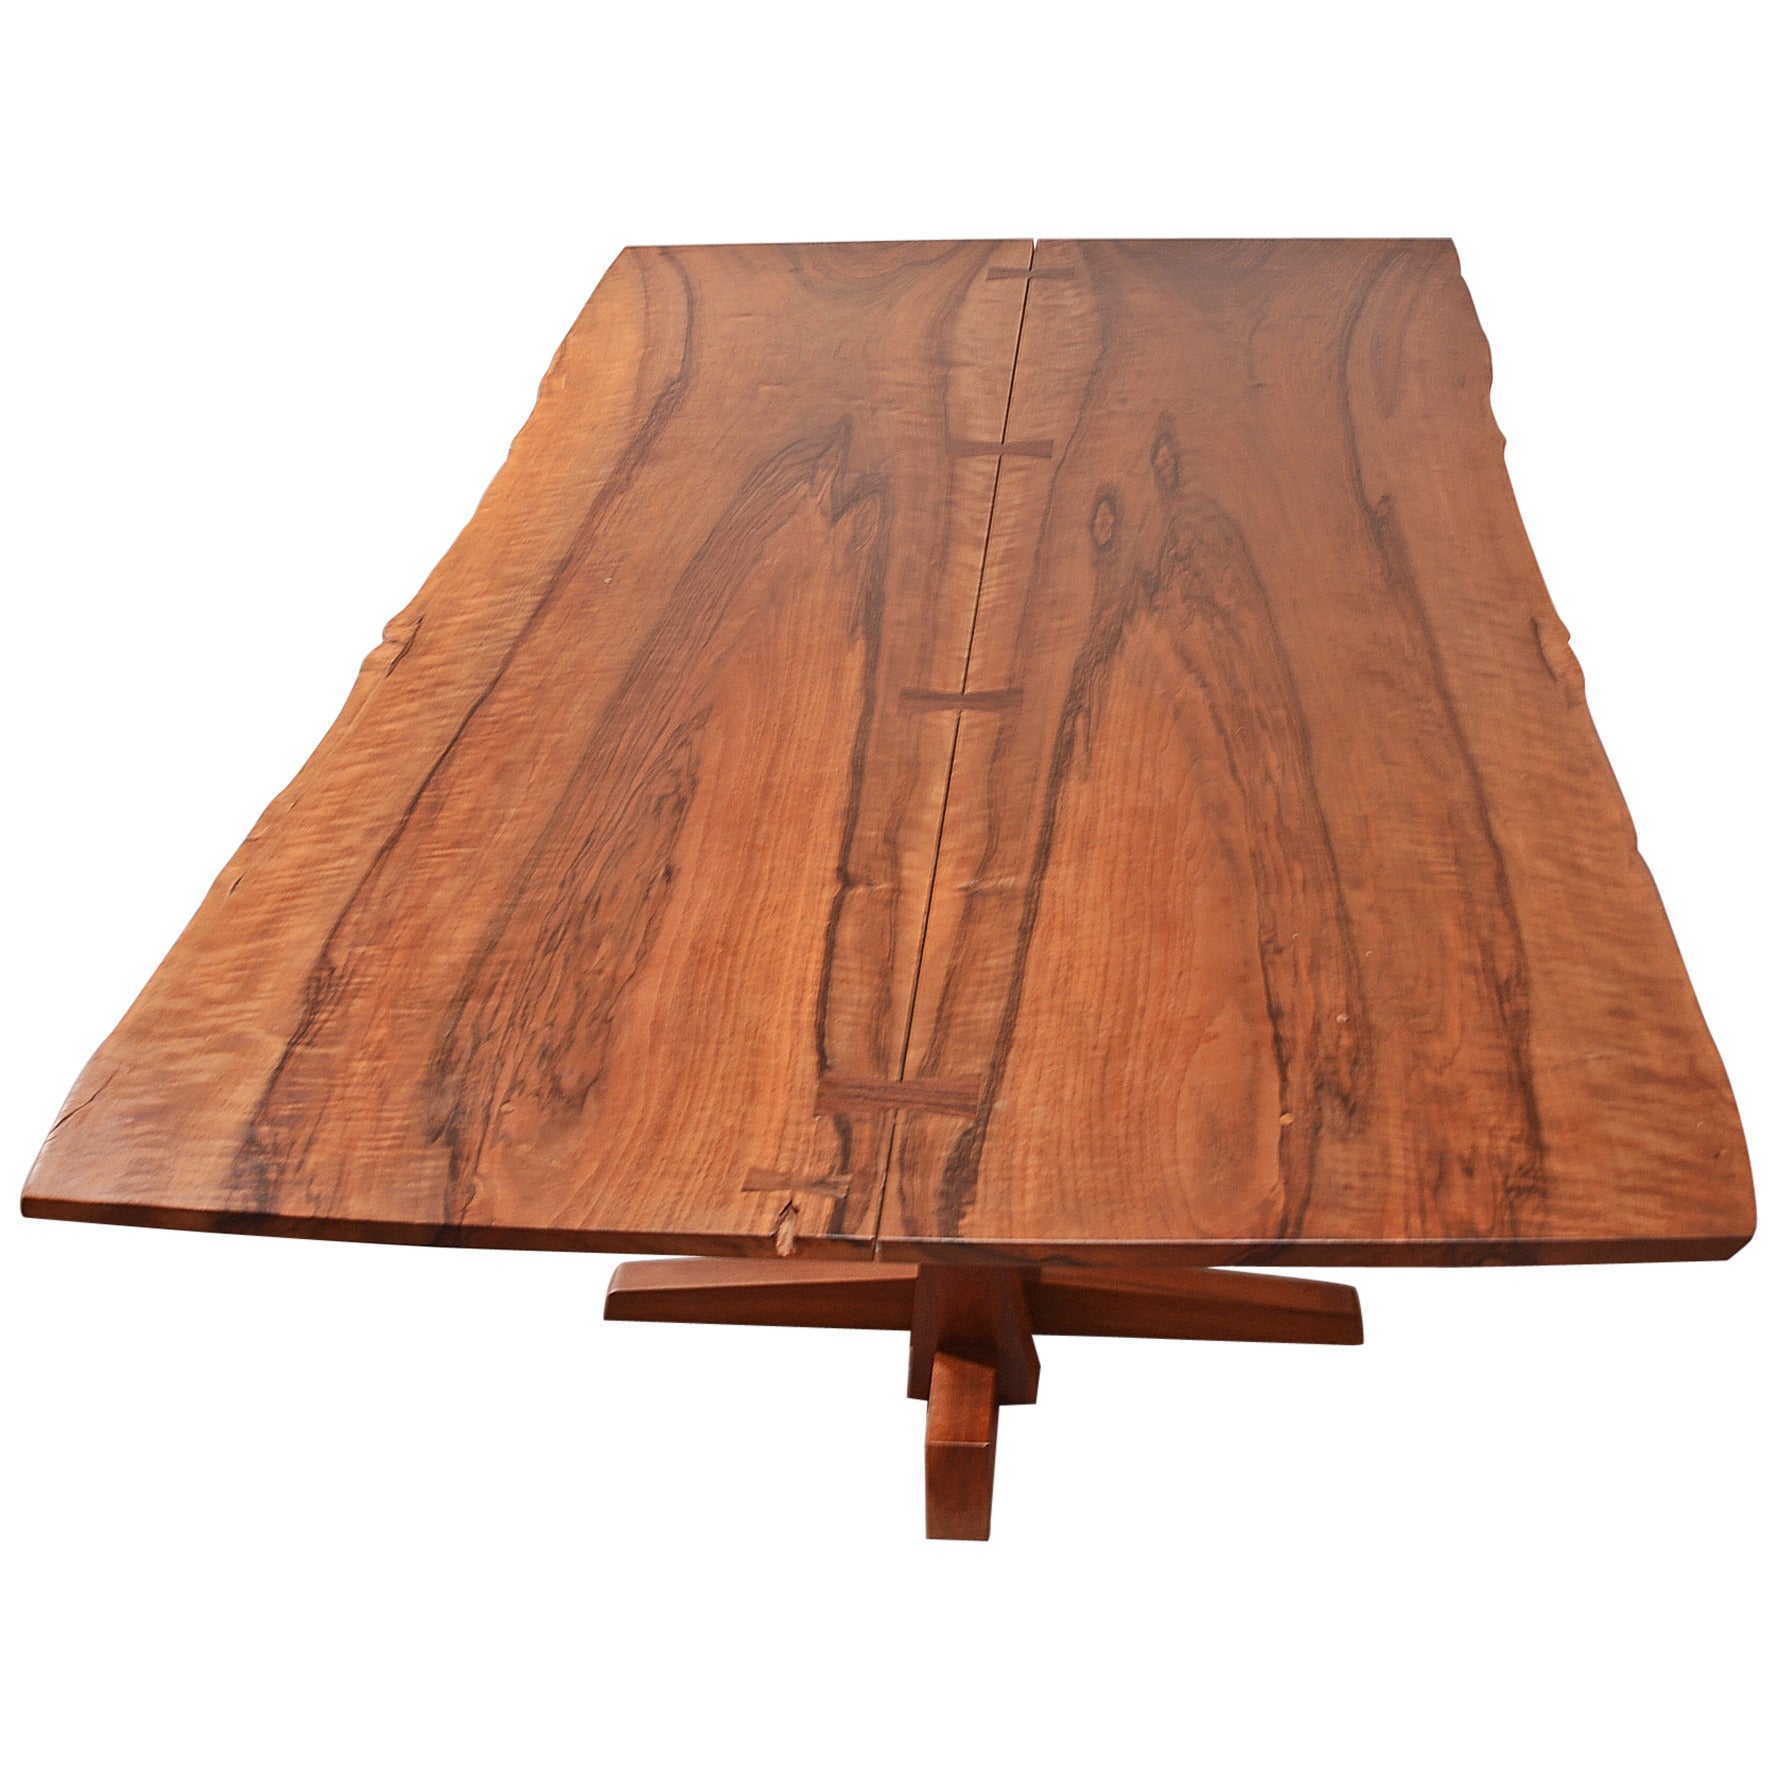 Rare Persian Walnut Conoid Dining Table by George Nakashima, 1971 For Sale